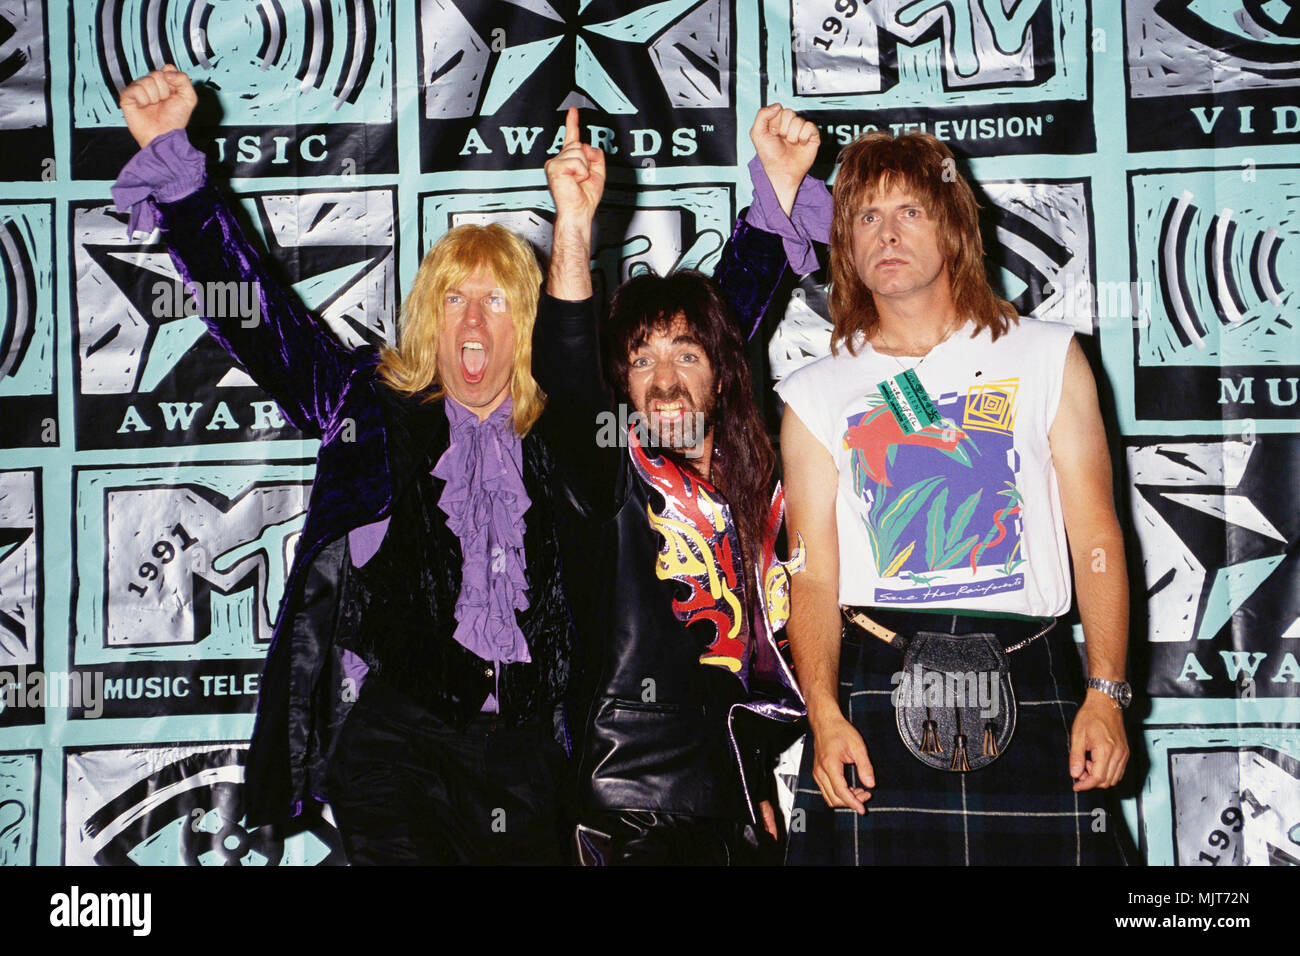 1991, USA --- The fictional rock band Spinal Tap attends the 1991 MTV Music Awards. Left to right: David St. Hubbins (Michael McKean), Derek Smalls (Harry Shearer), and Nigel Tufnel (Christopher Guest). --- ' Tsuni / USA 'Spinal Tap at MTV Music Awards Spinal Tap at MTV Music Awards inquiry tsuni@Gamma-USA.com Stock Photo